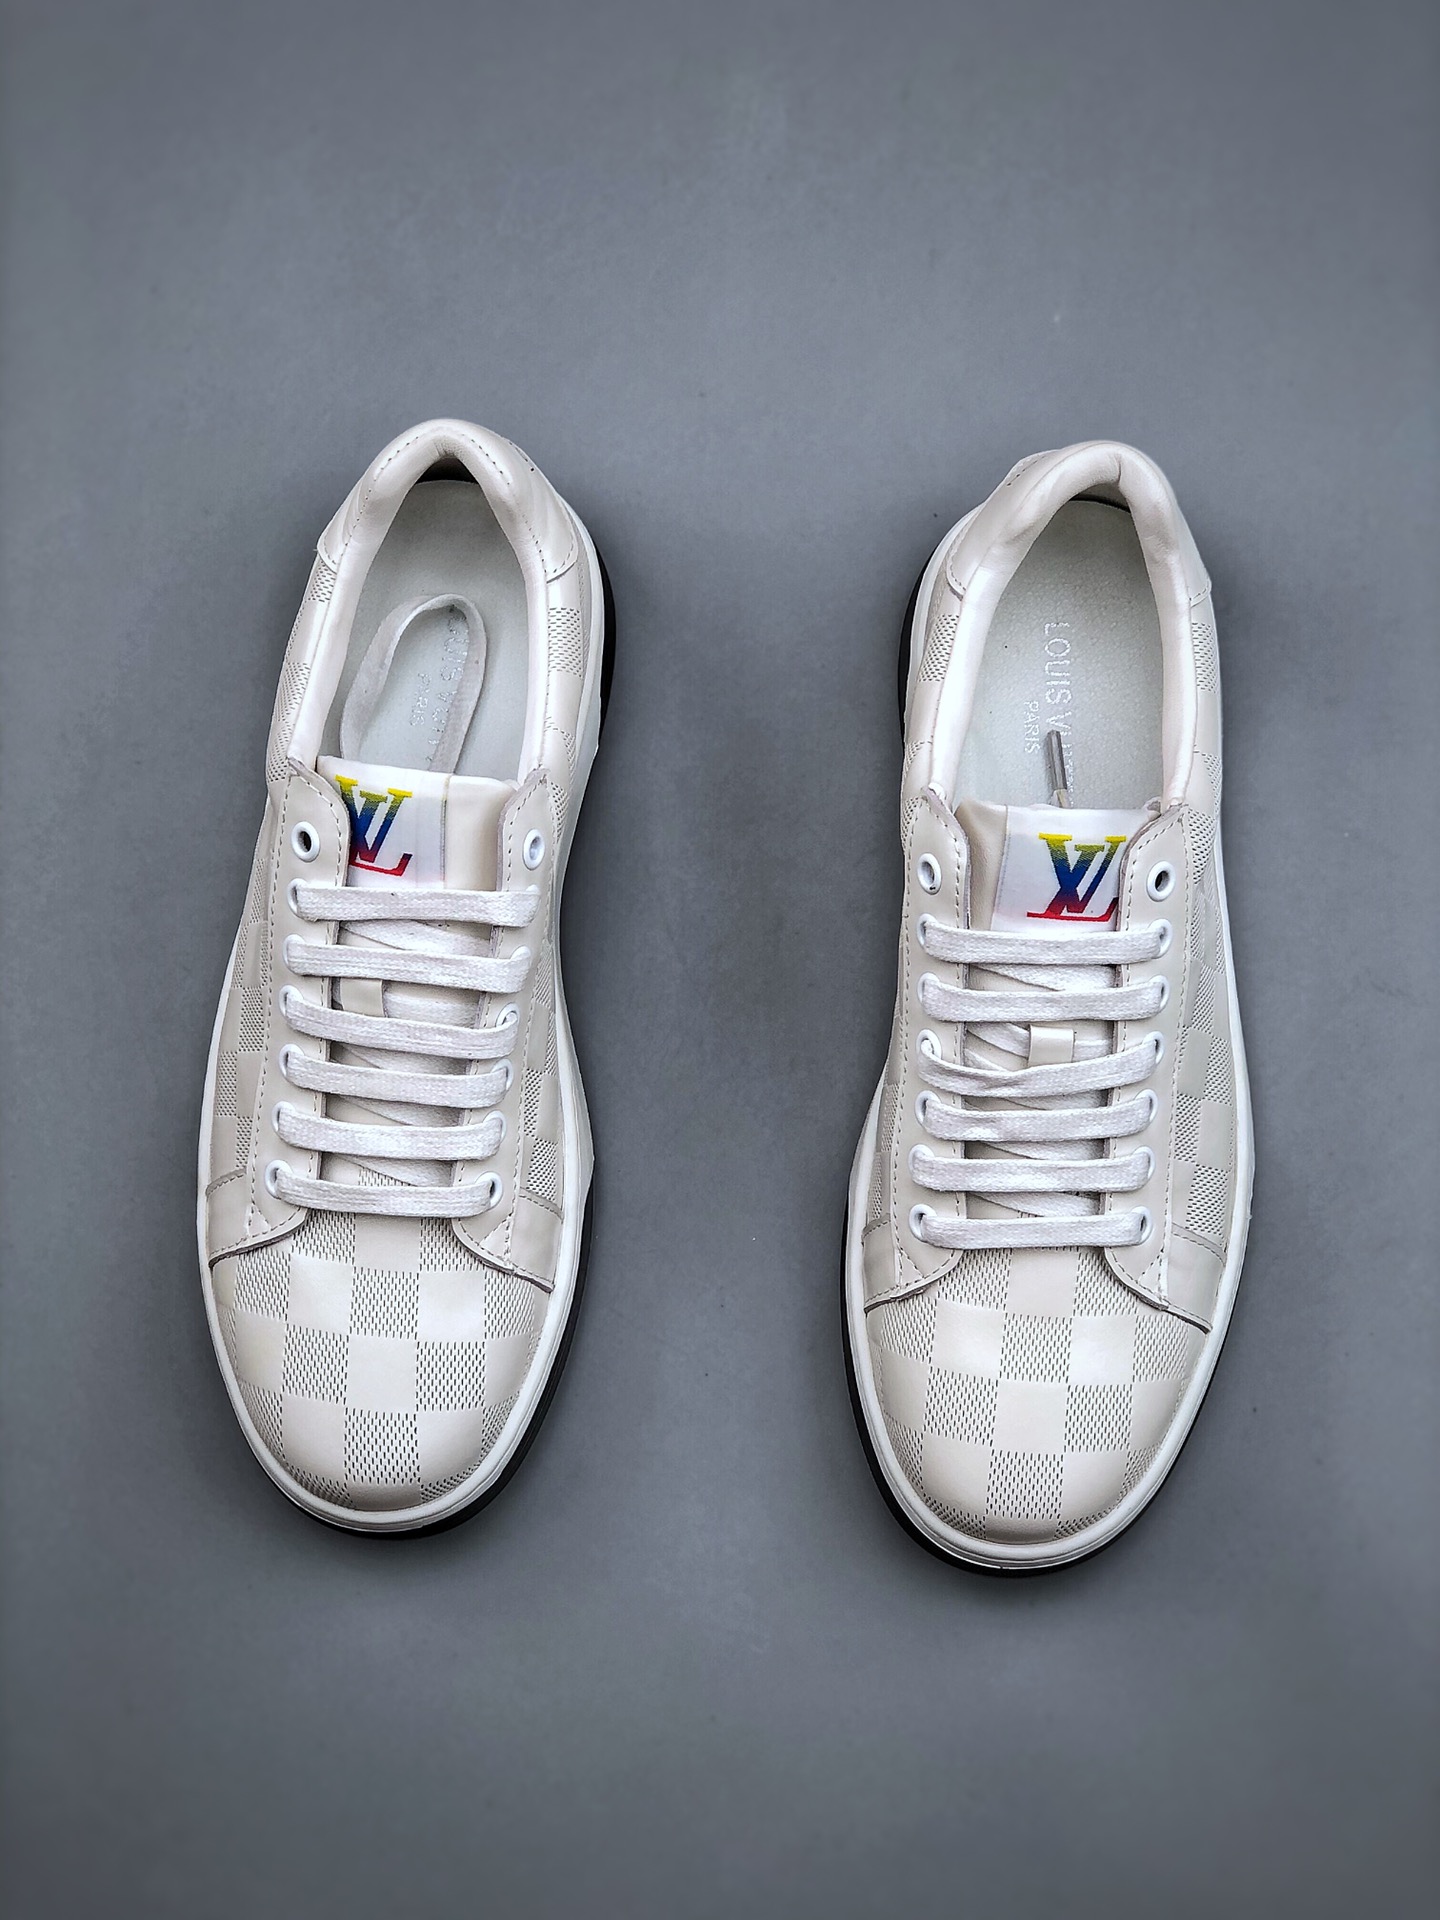 L/New LV Louis Vuitton Remarque Low Remarque series classic low top